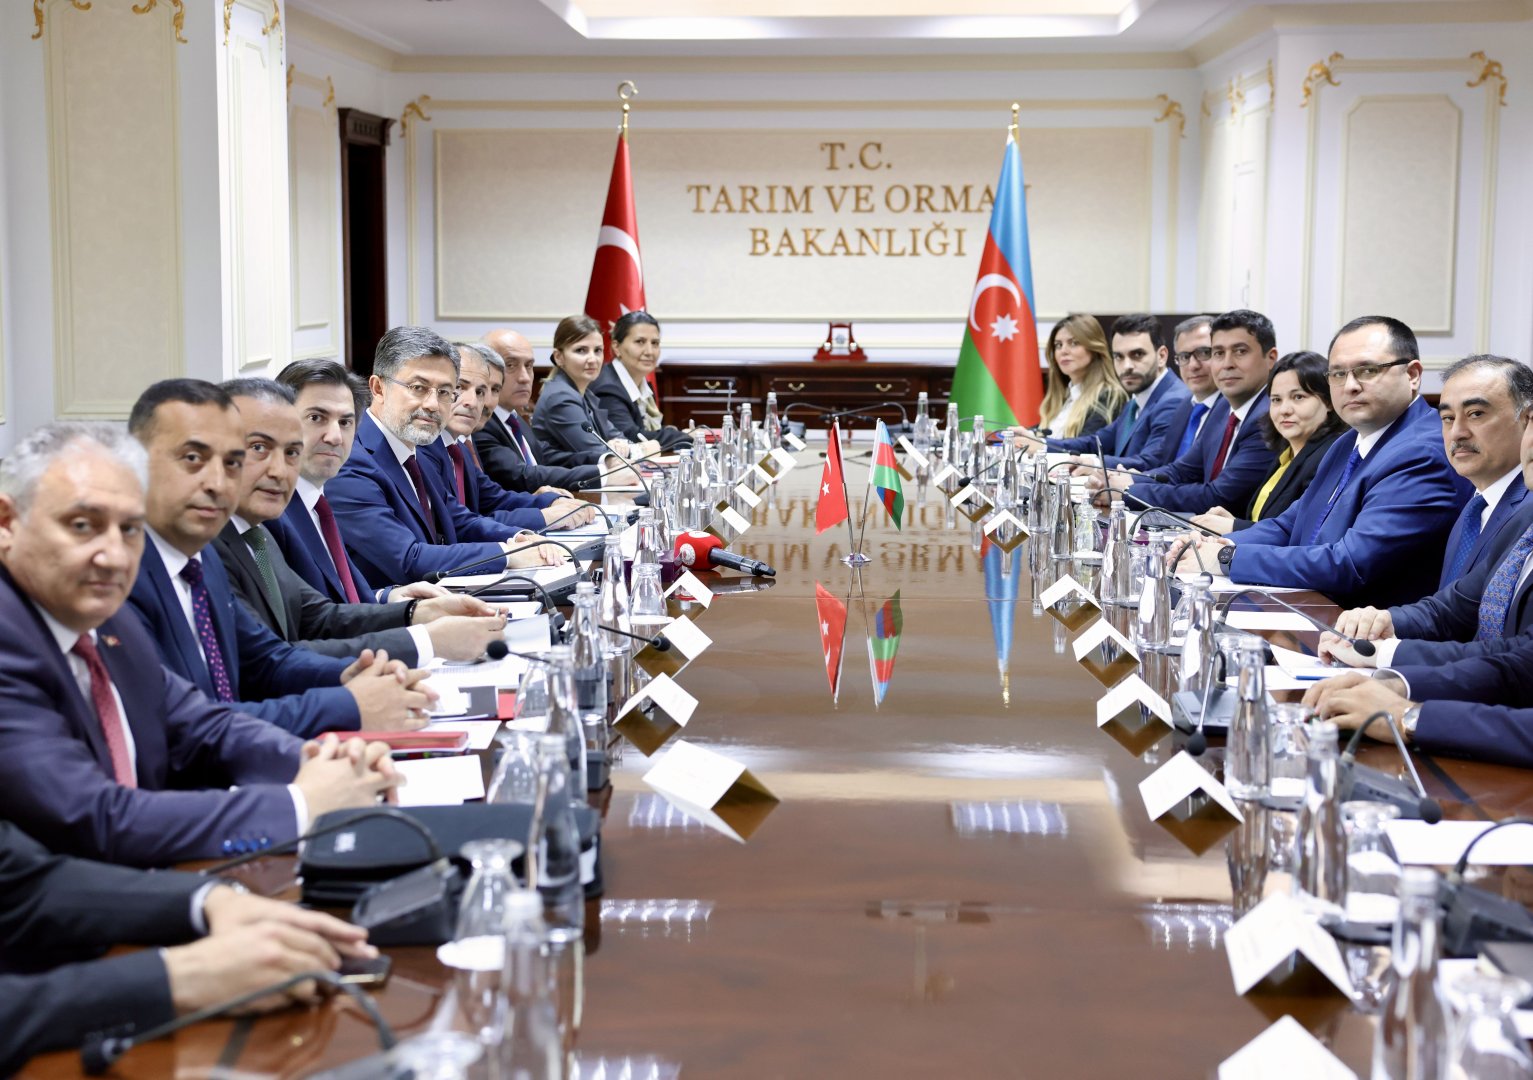 Azerbaijan, Türkiye sign declaration on cooperation in agrarian research and dev't (PHOTO)